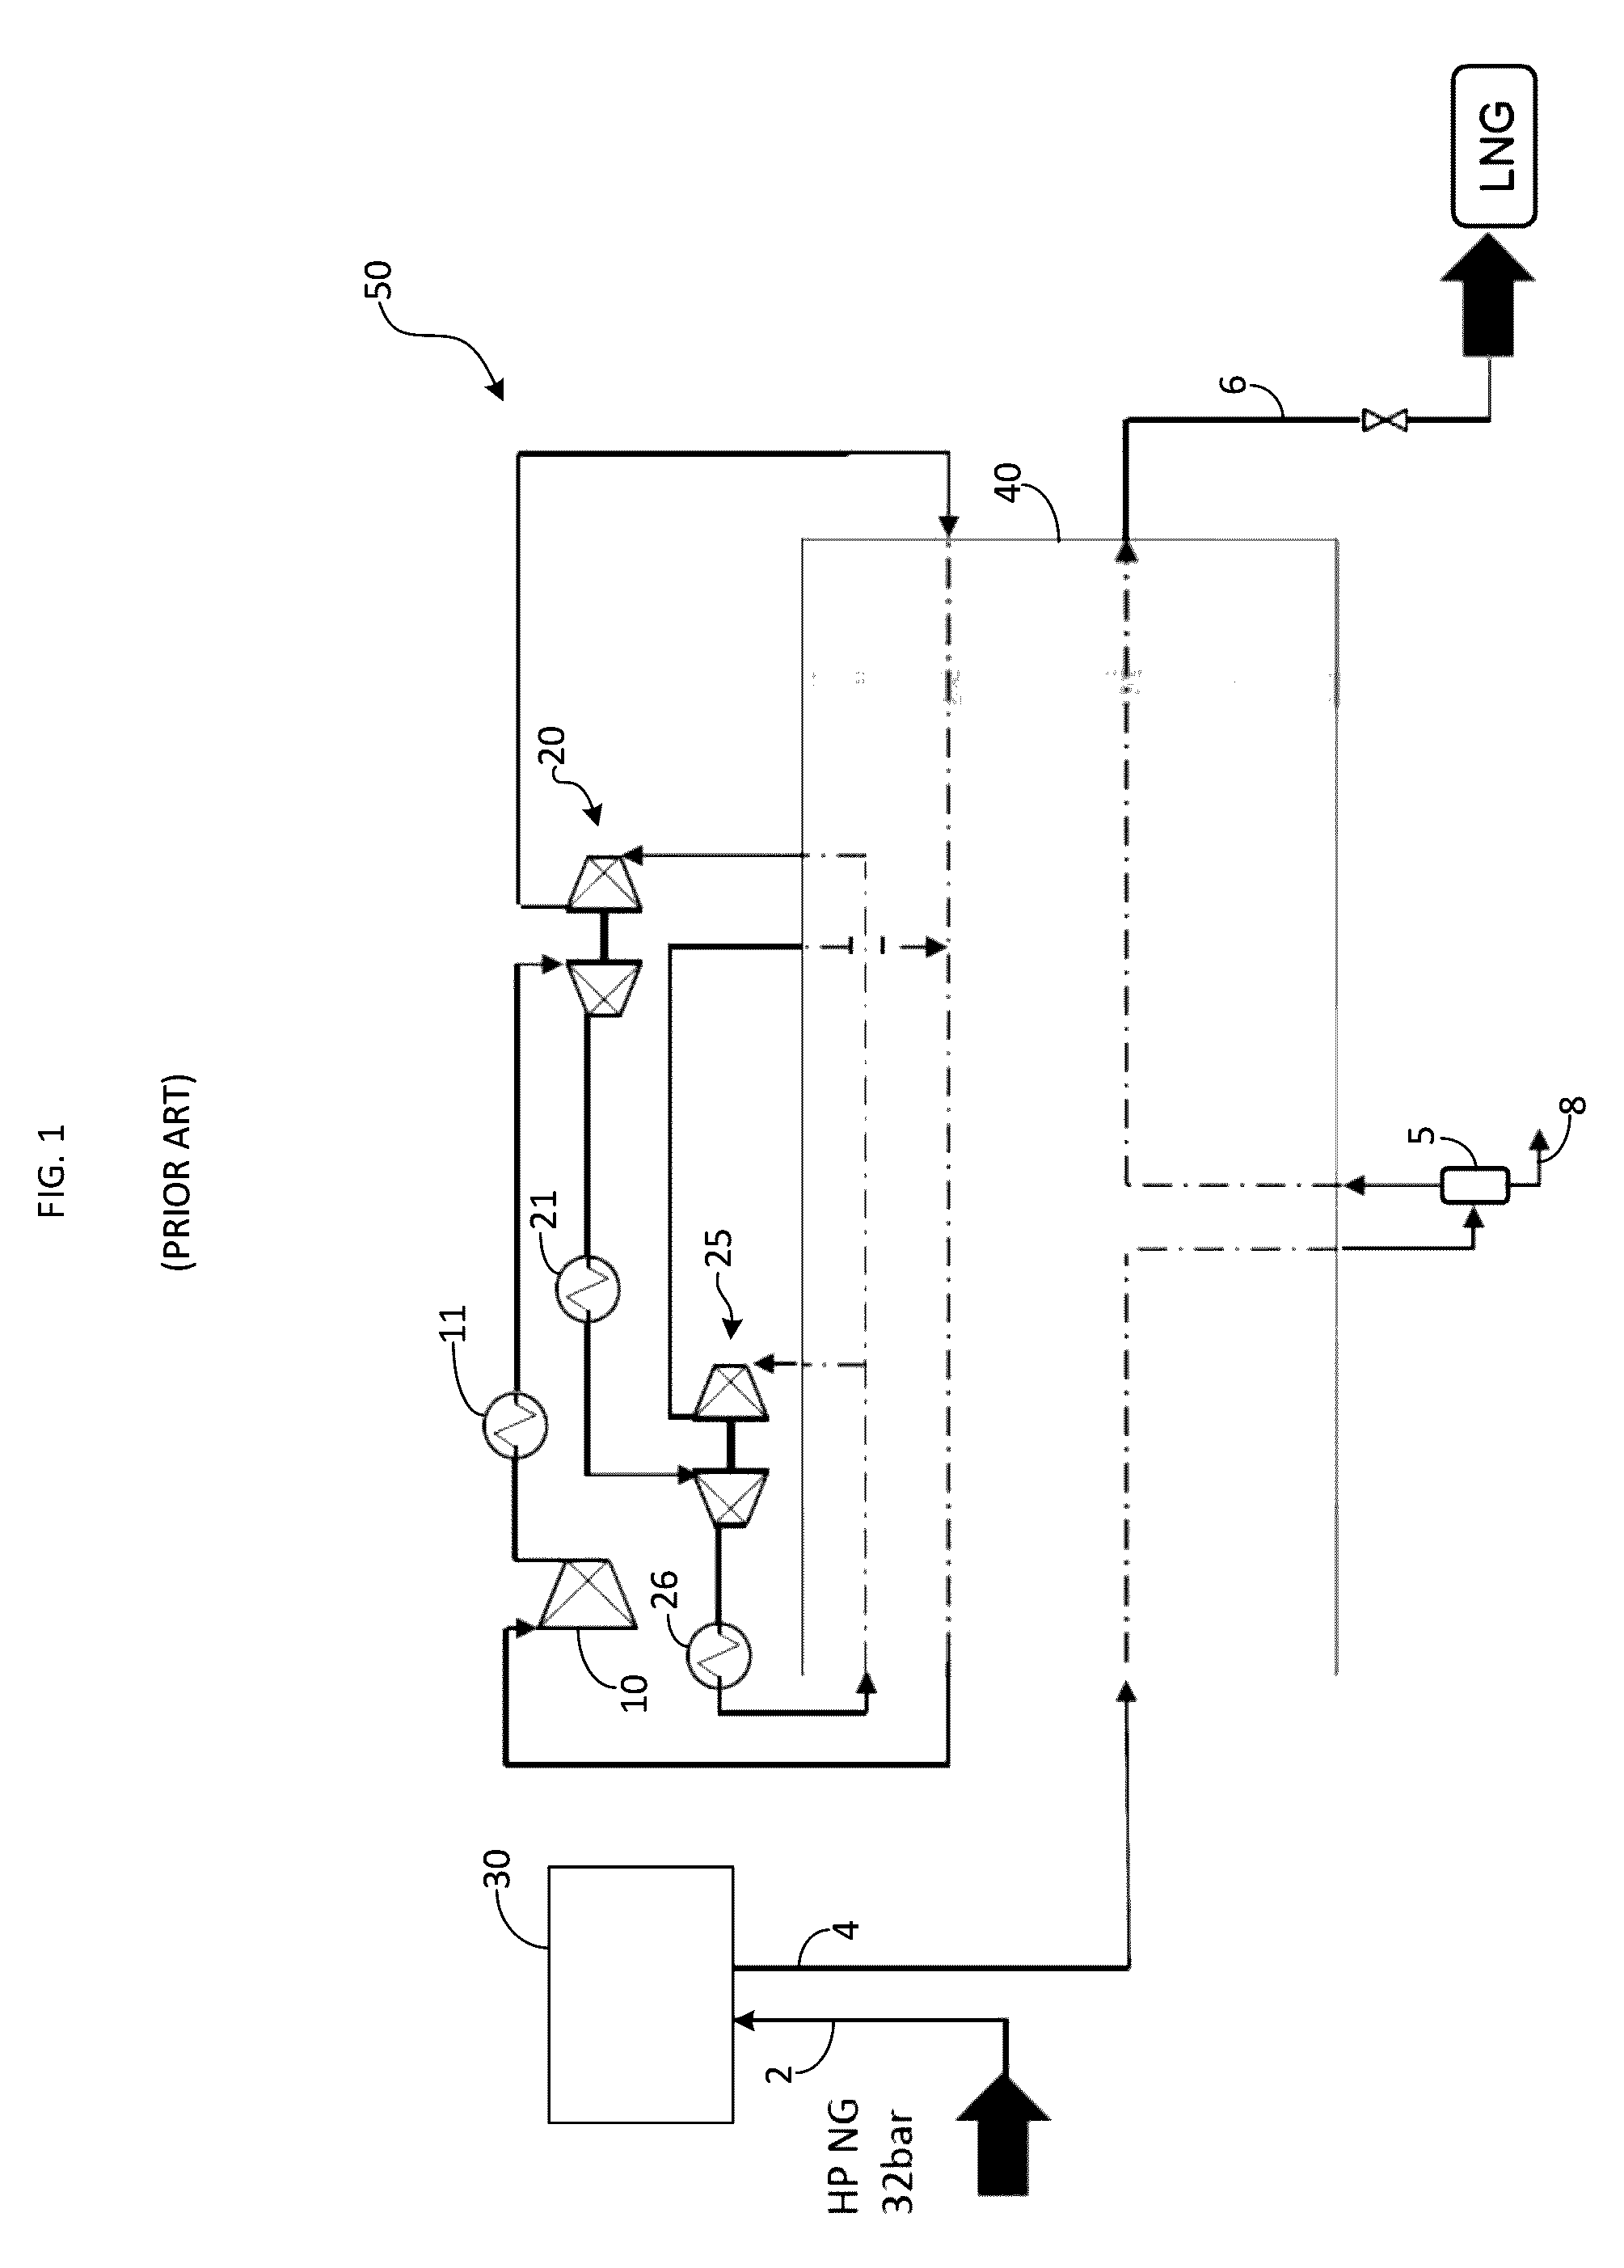 Method for the integration of a nitrogen liquefier and liquefaction of natural gas for the production of liquefied natural gas and liquid nitrogen